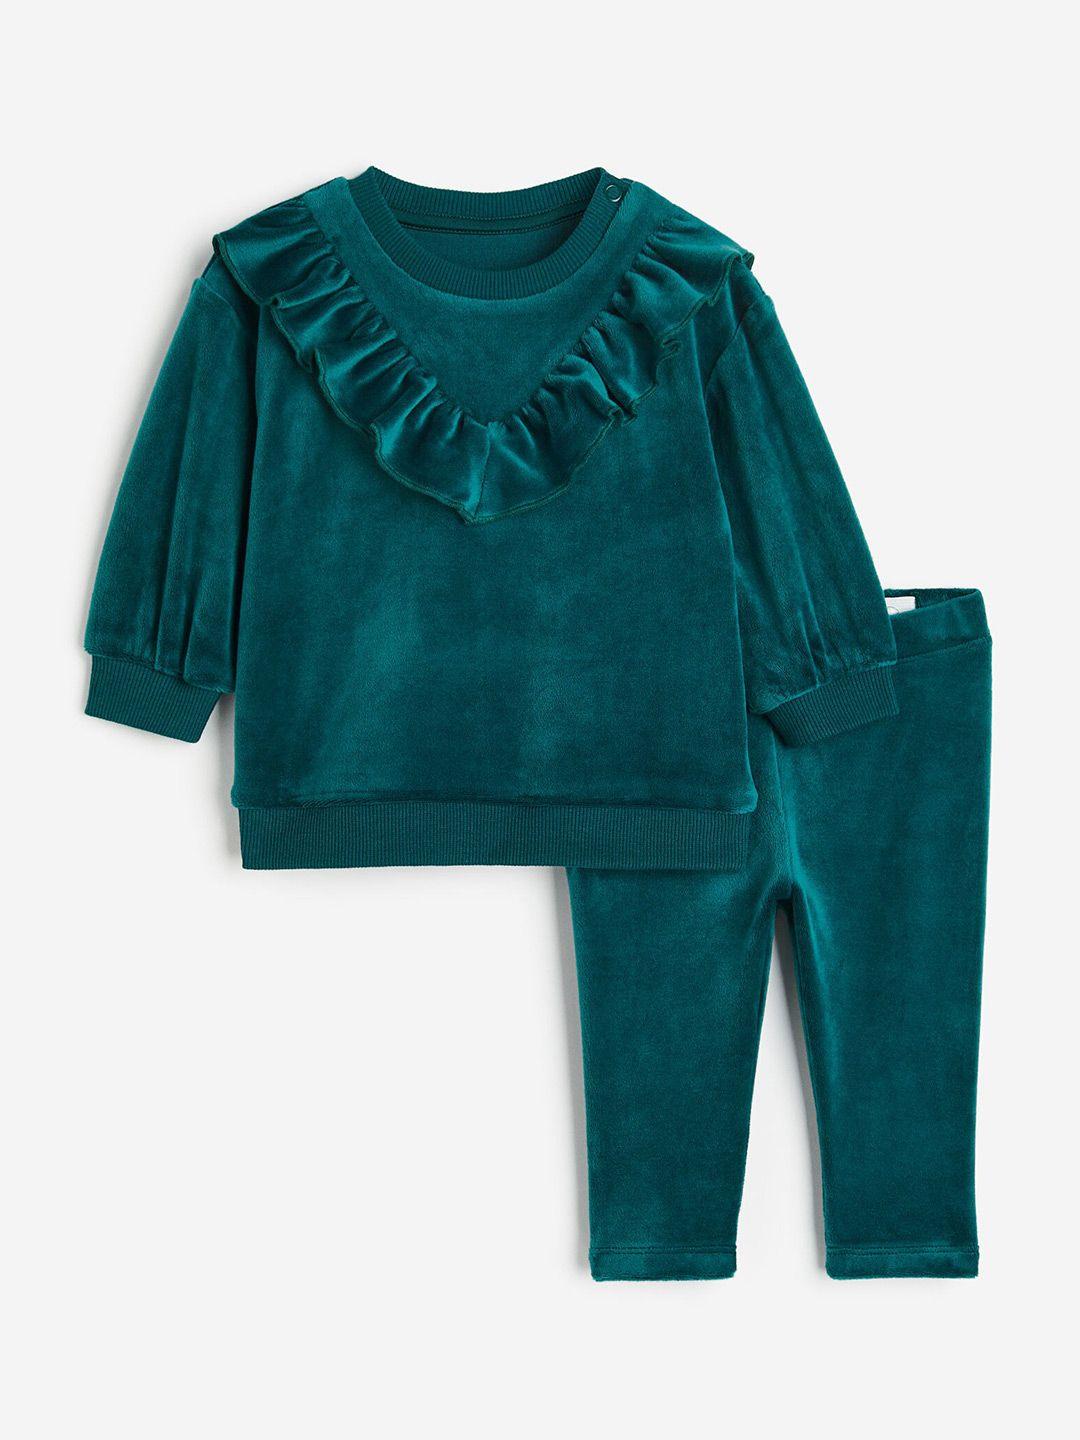 h&m boys green top with trousers